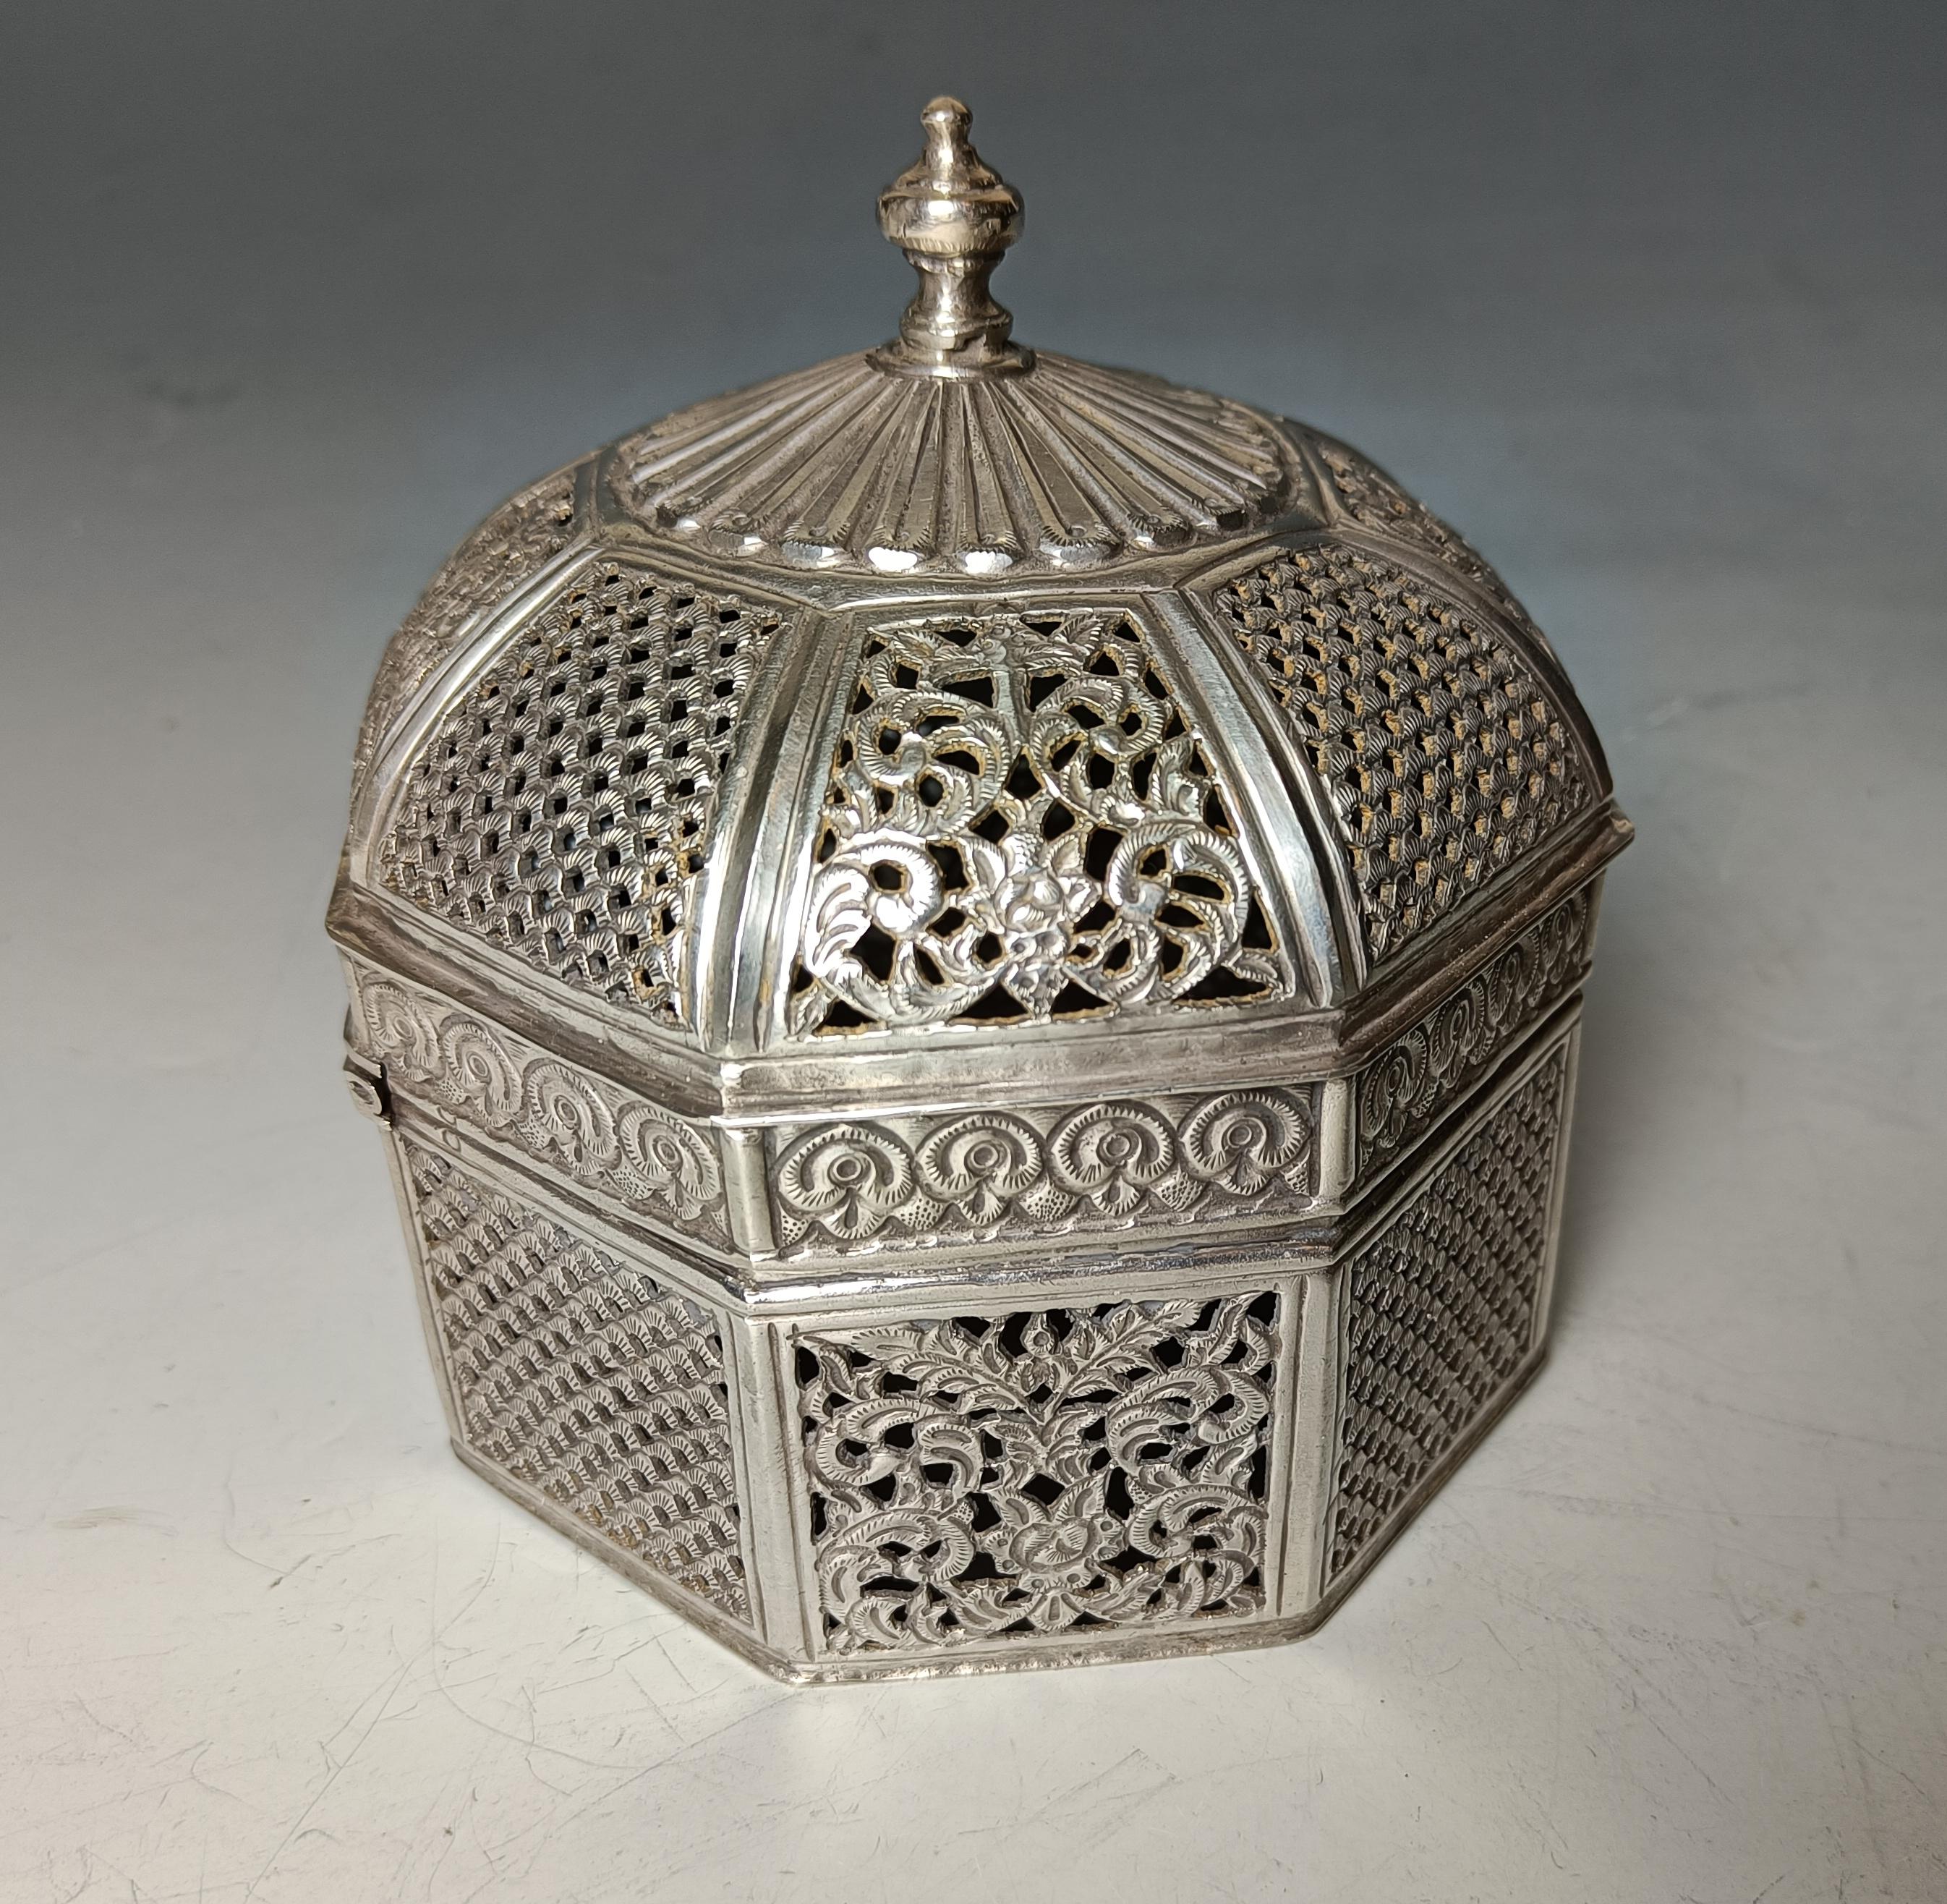 Superb Rare large Octagonal Domed Indian Mughal Silver Box Antiques Asian Art In Good Condition For Sale In London, GB